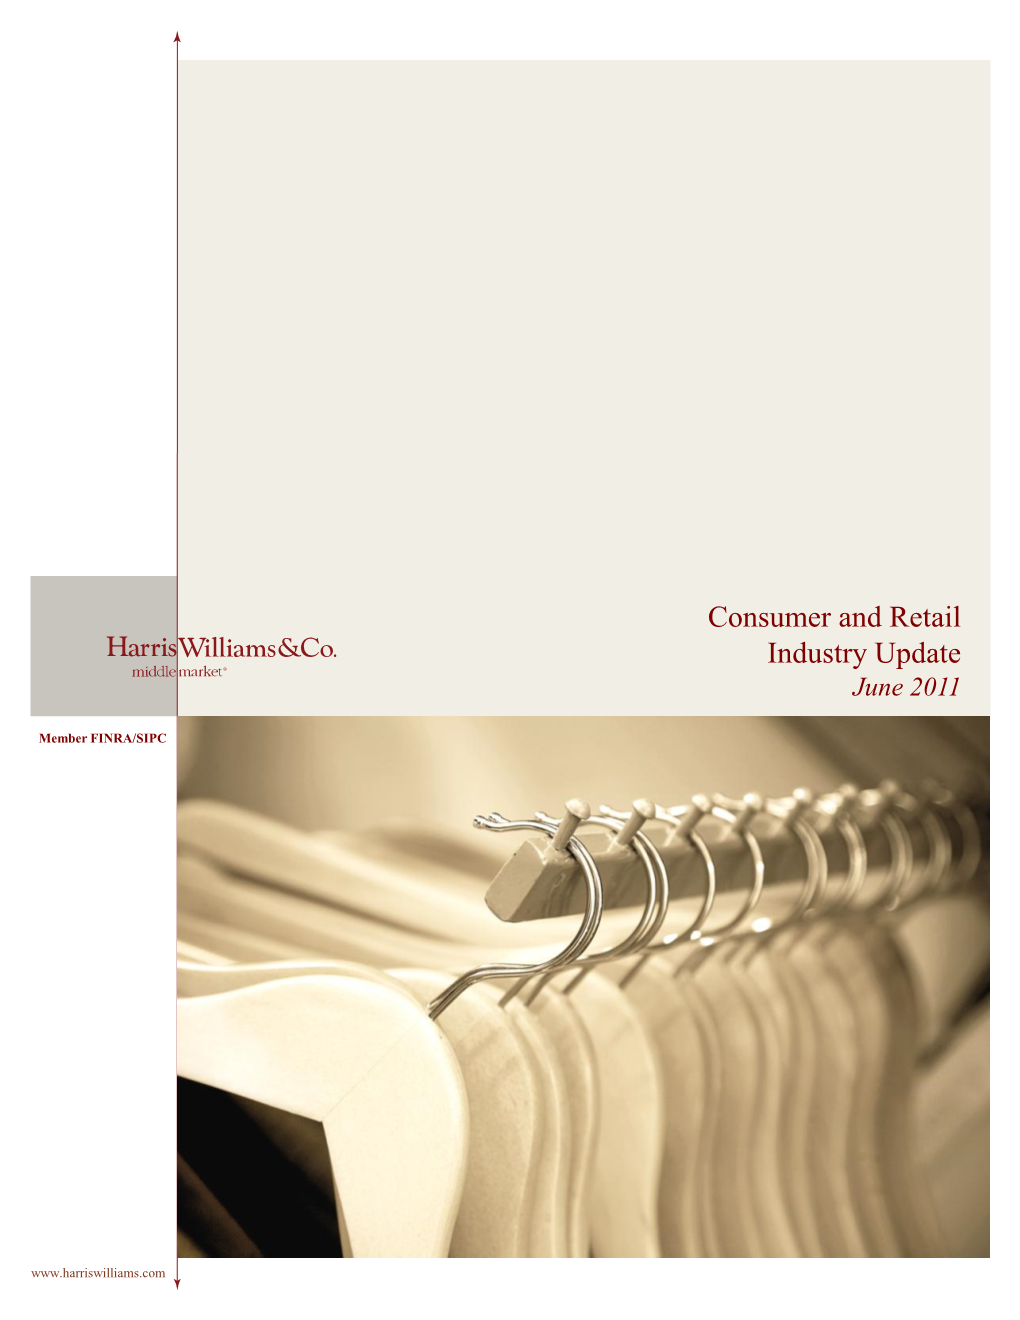 Consumer and Retail Industry Update June 2011